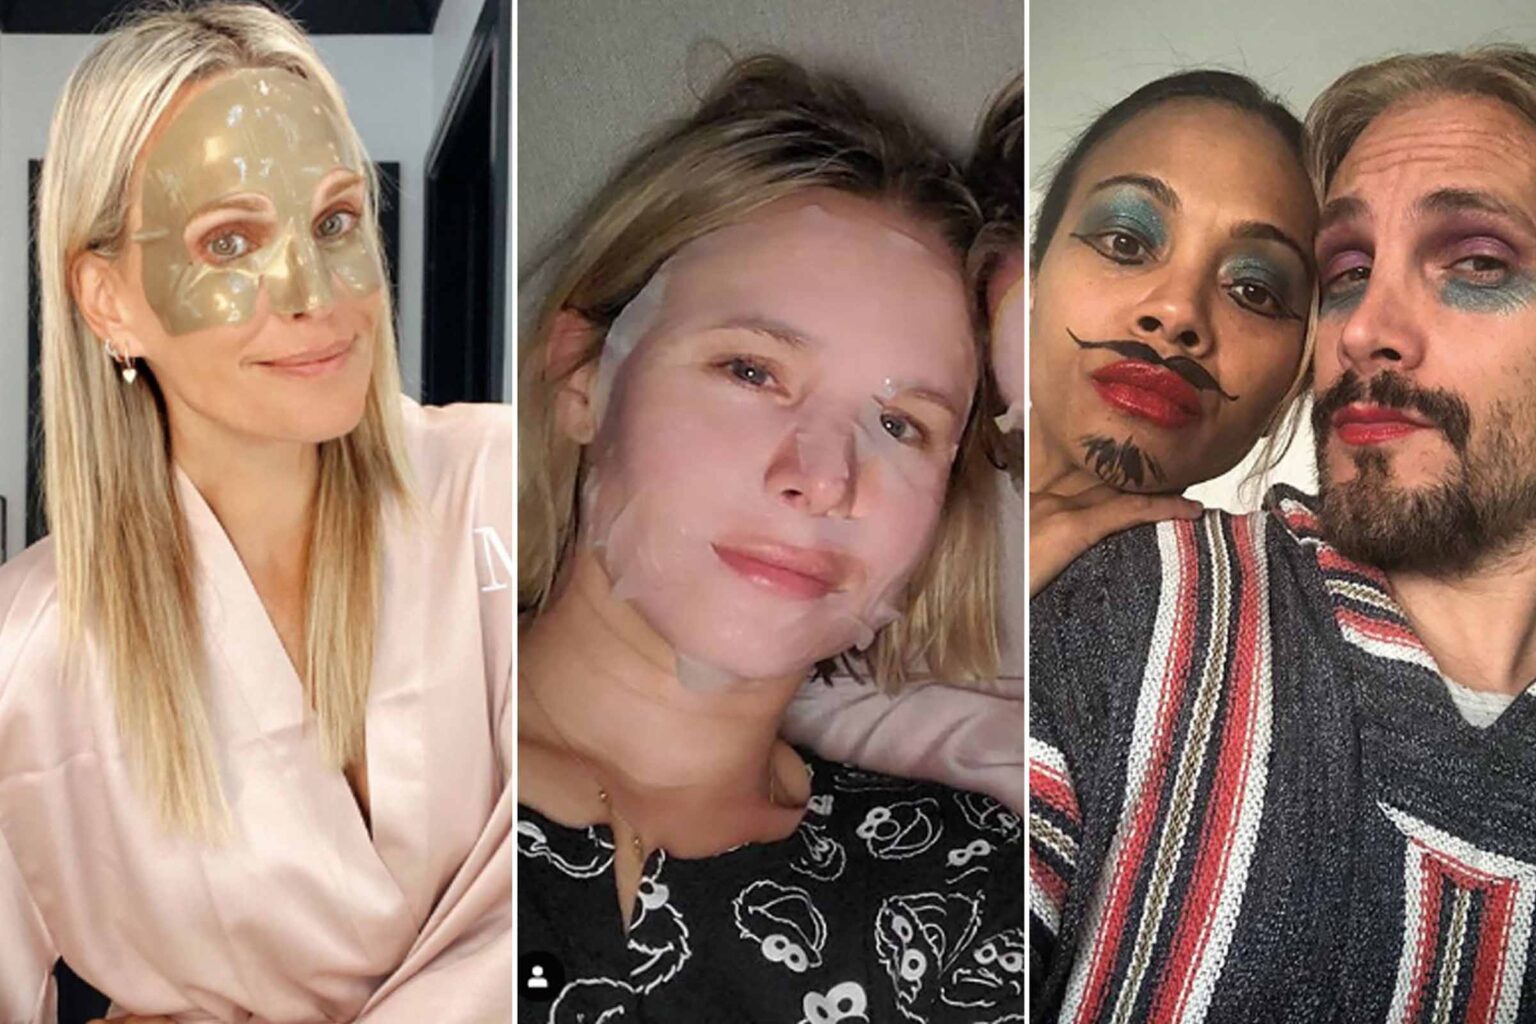 Jonathan Van Ness said it best: "Don't try new lewks during quarantine." Of course, he nor these other celebrities listened to that advice.